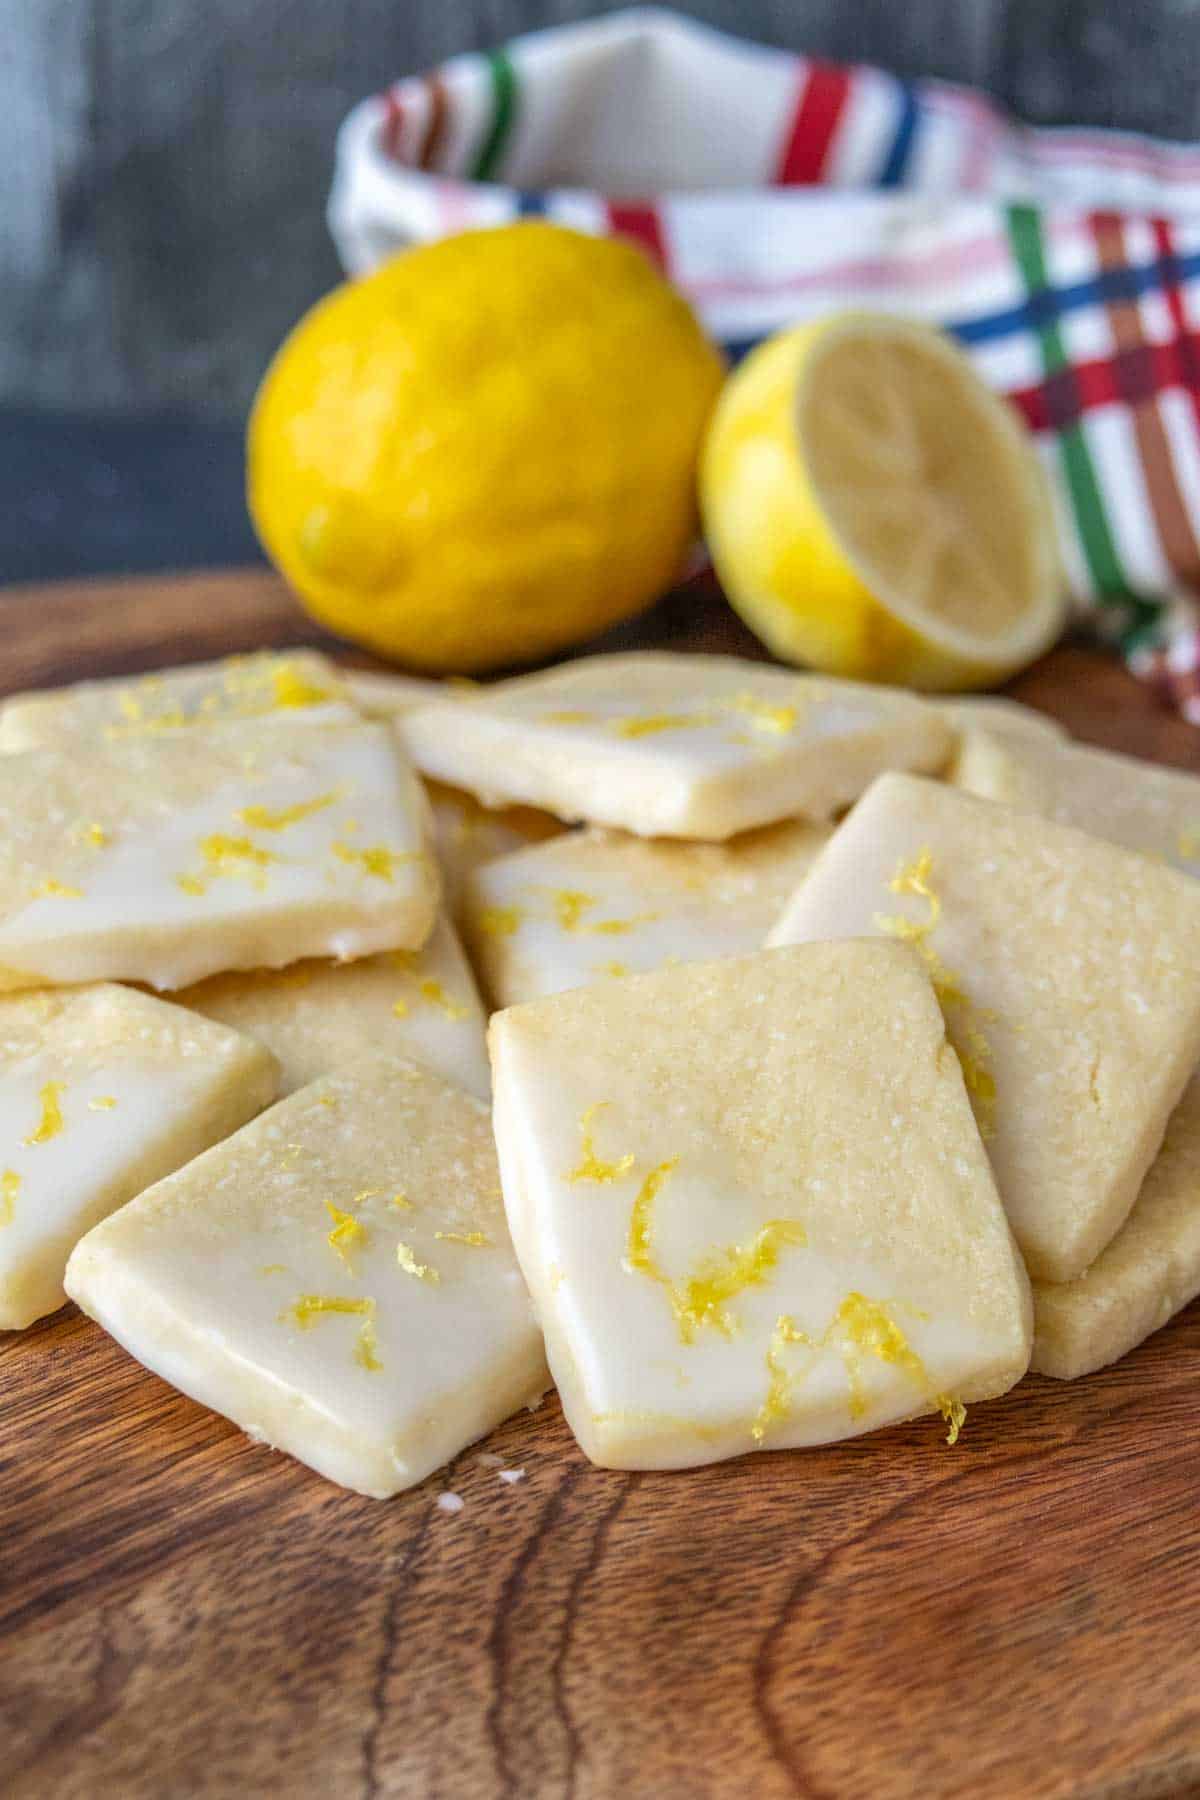 Lemon cookies on a wooden cutting board.